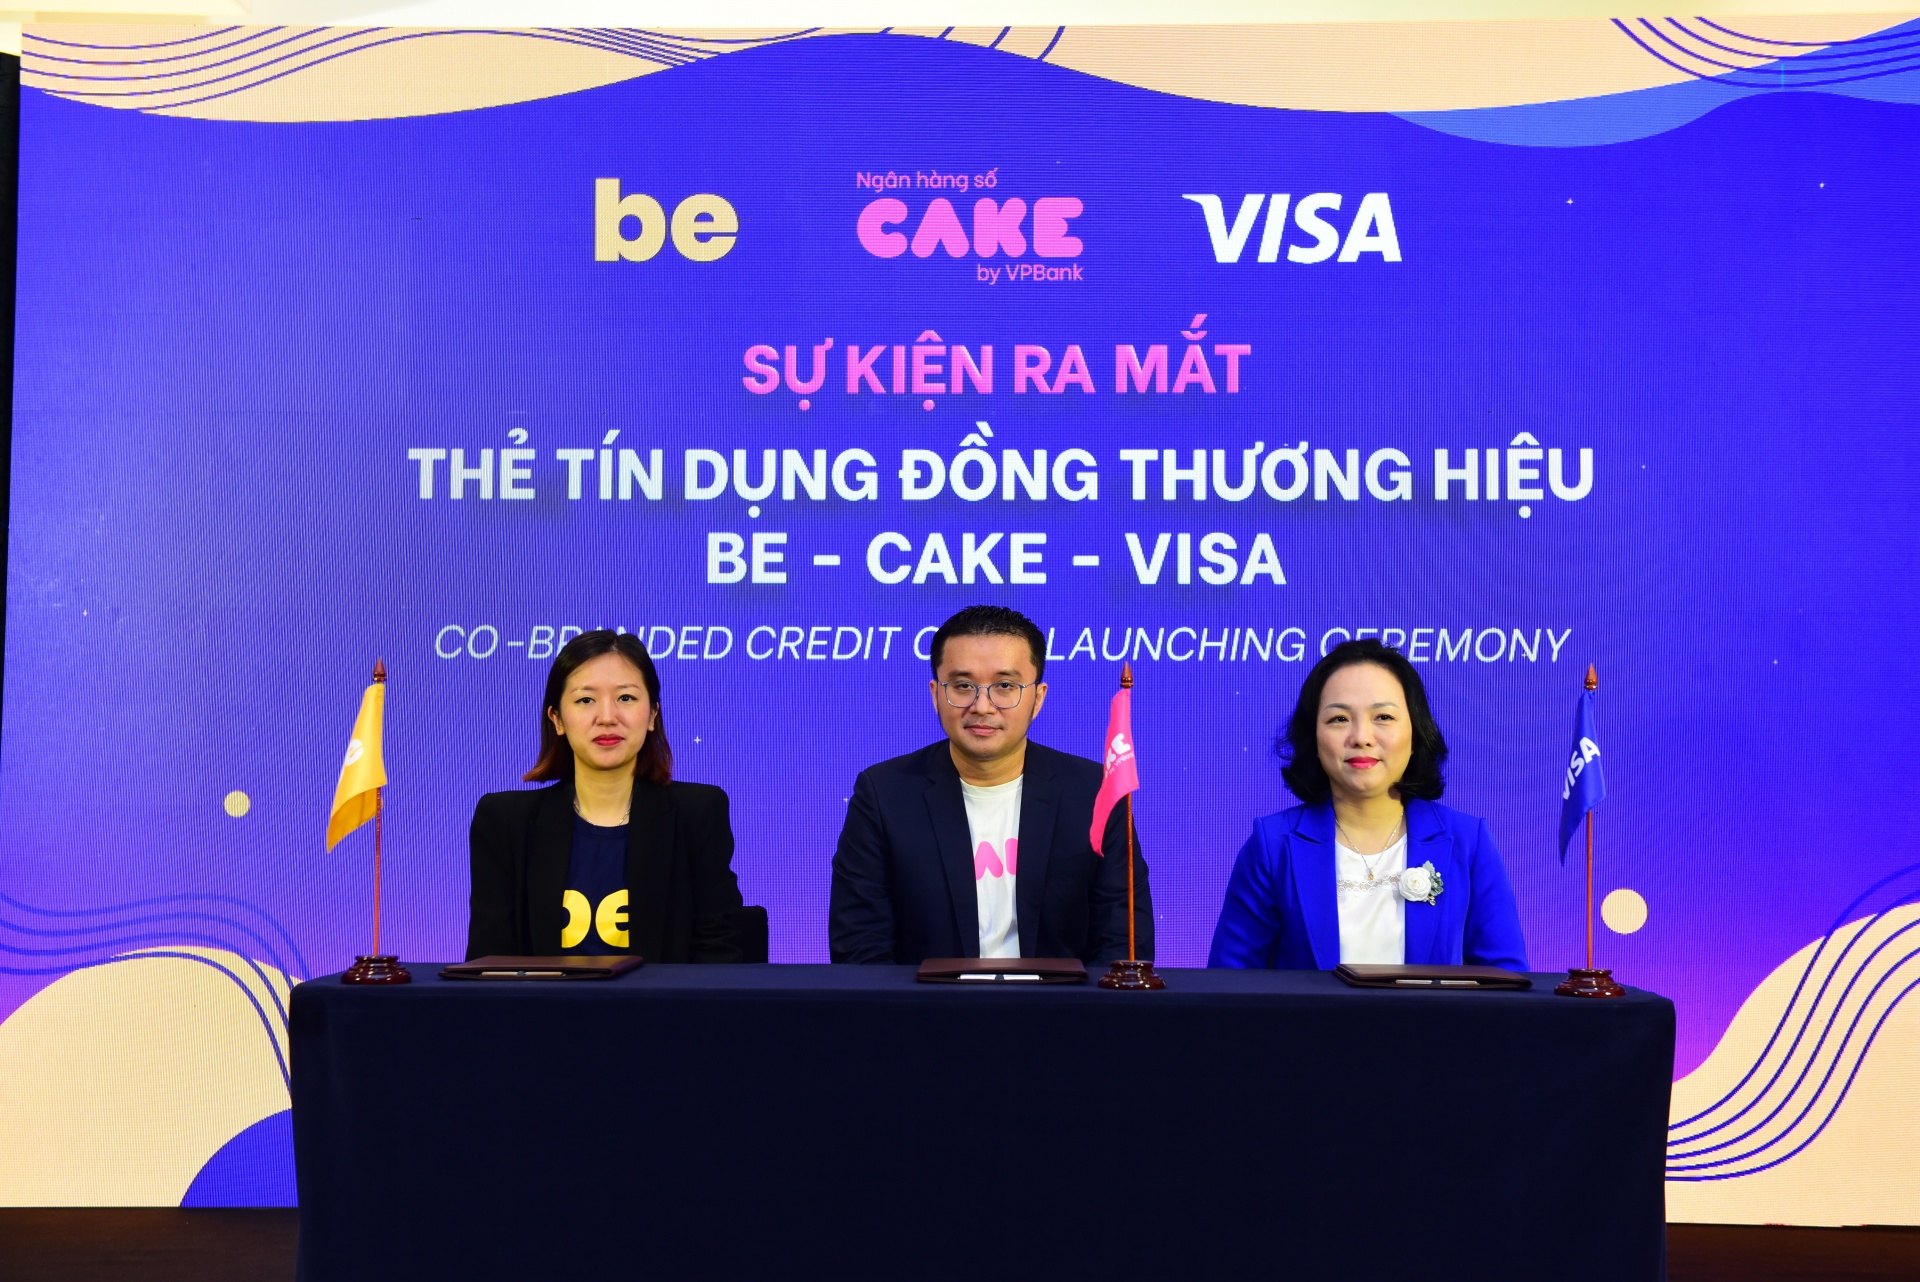 be cake visa credit card launched to enhance digital payment experience